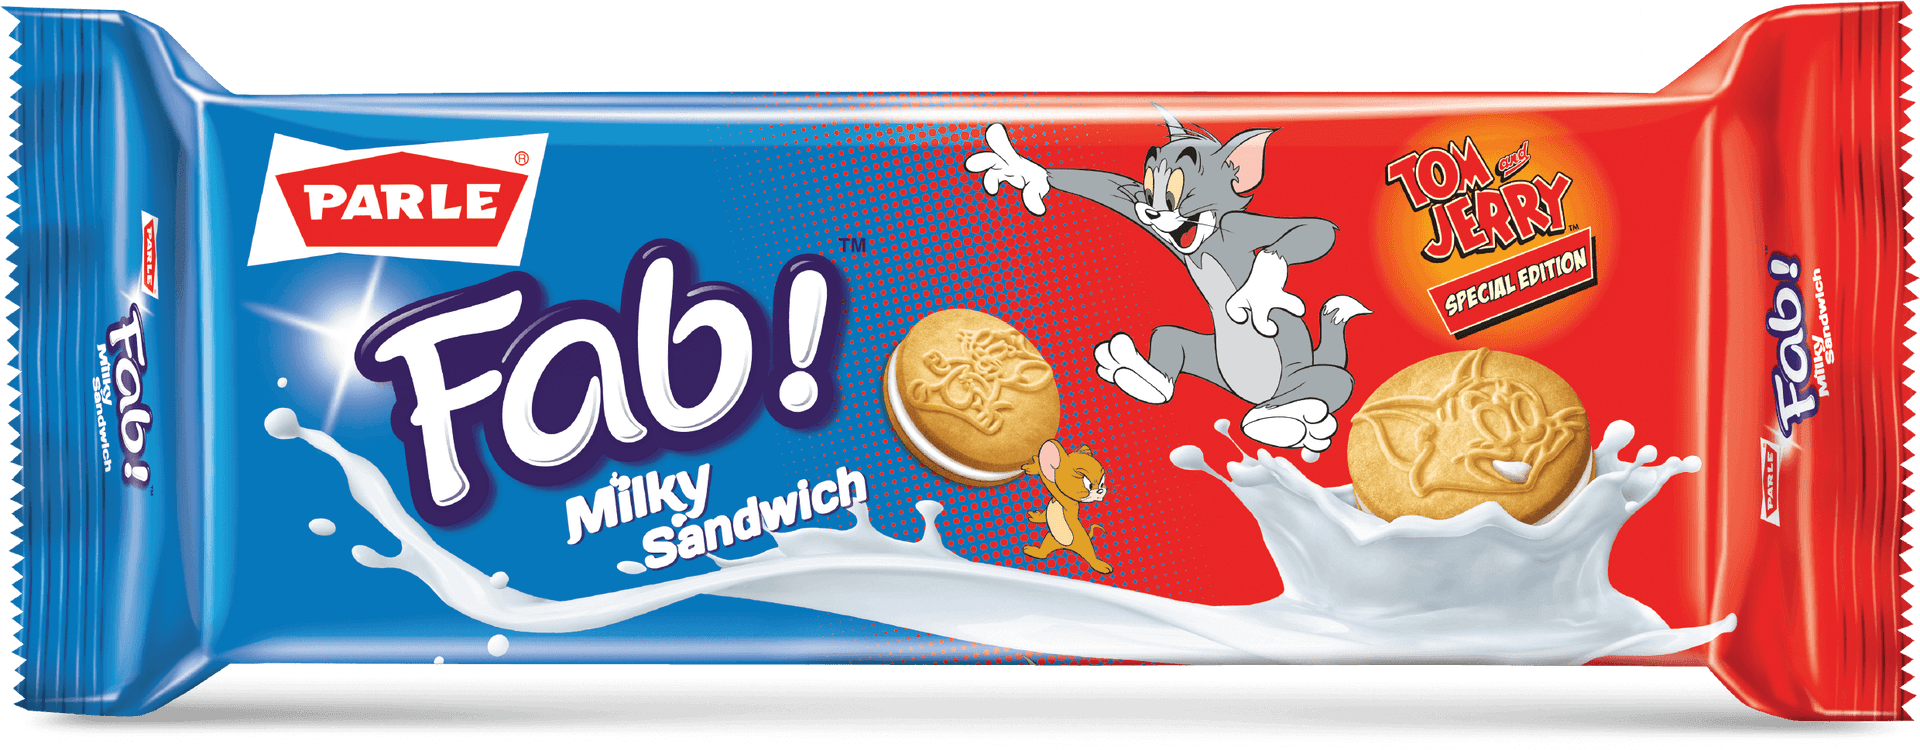 Parle Fab Milky Sandwich Biscuit Pack Tomand Jerry Edition PNG image